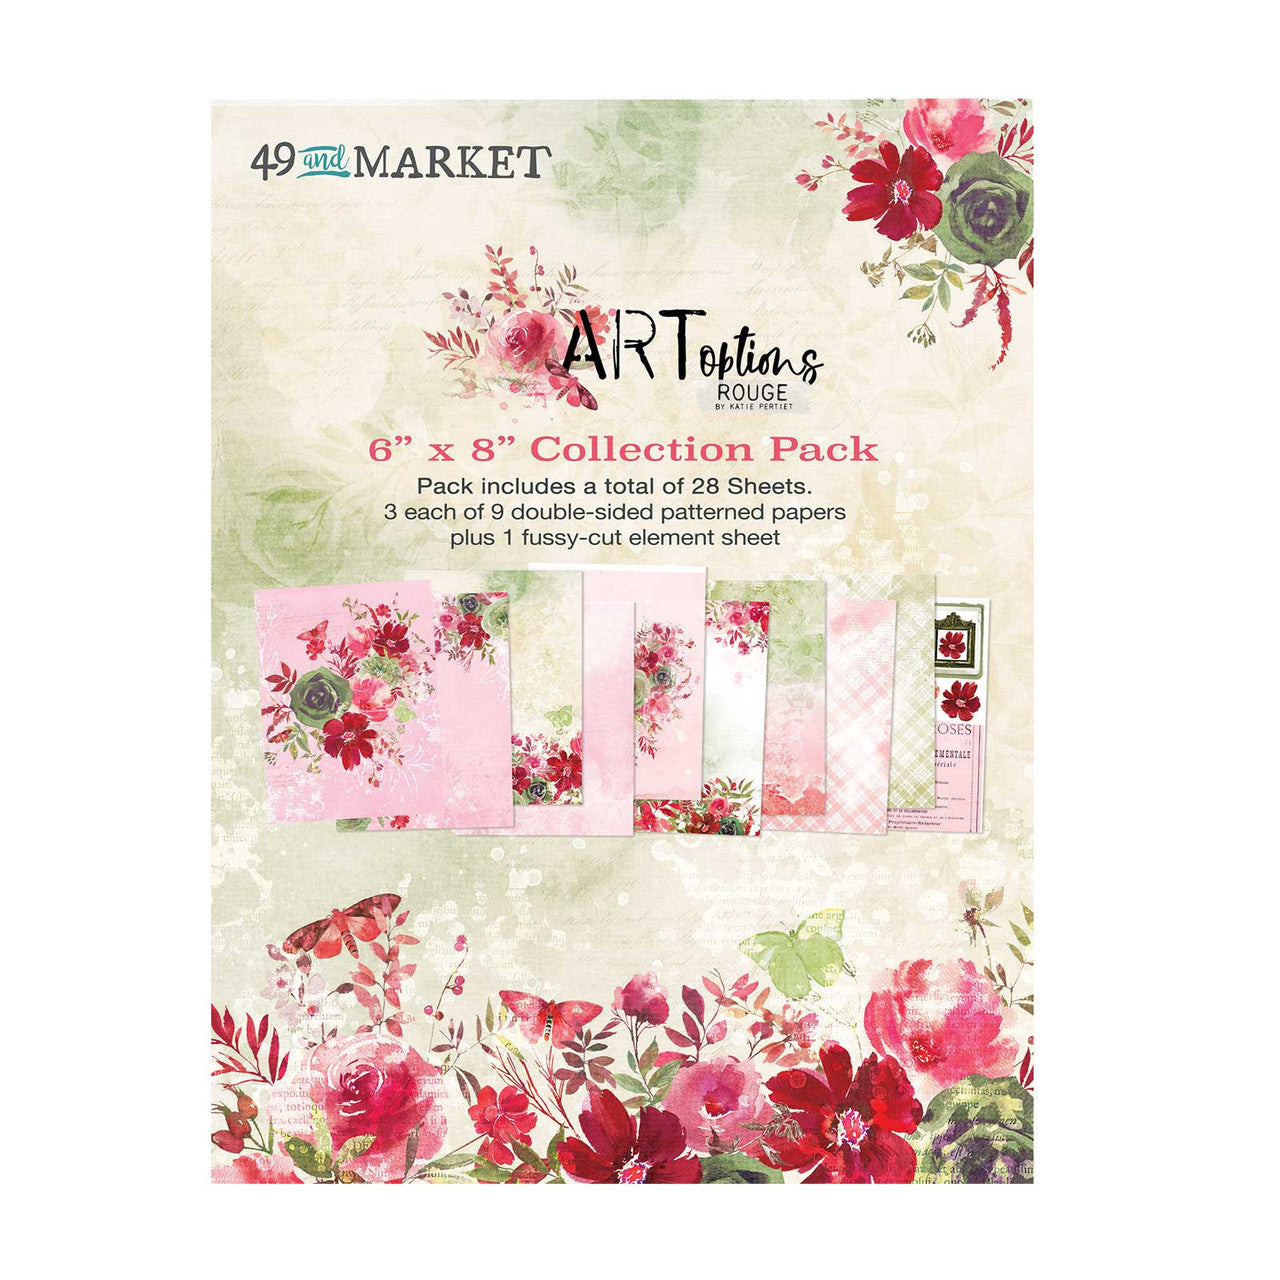 49 and Market ARToptions Rouge  6 x 8 Collection Pack